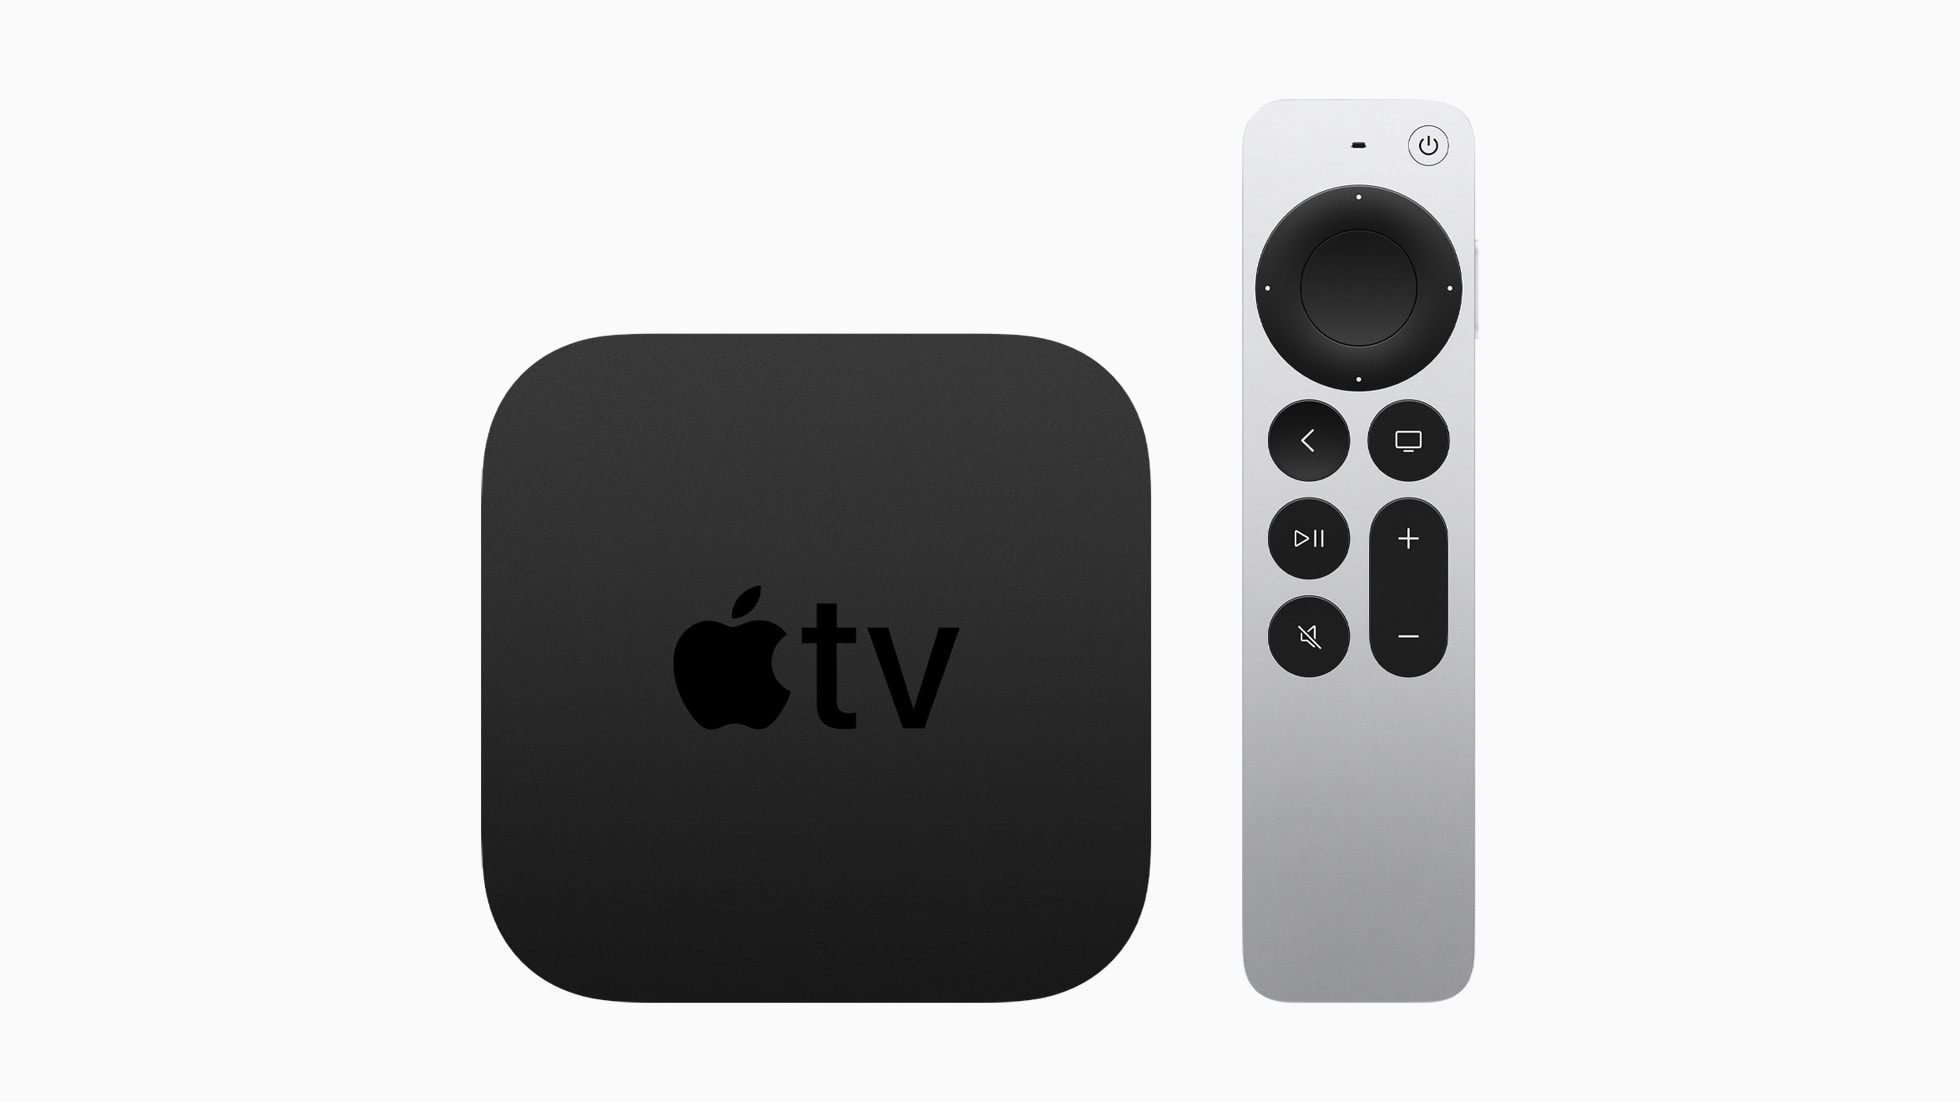 Apple's new Apple TV 4K with redesigned Siri Remote